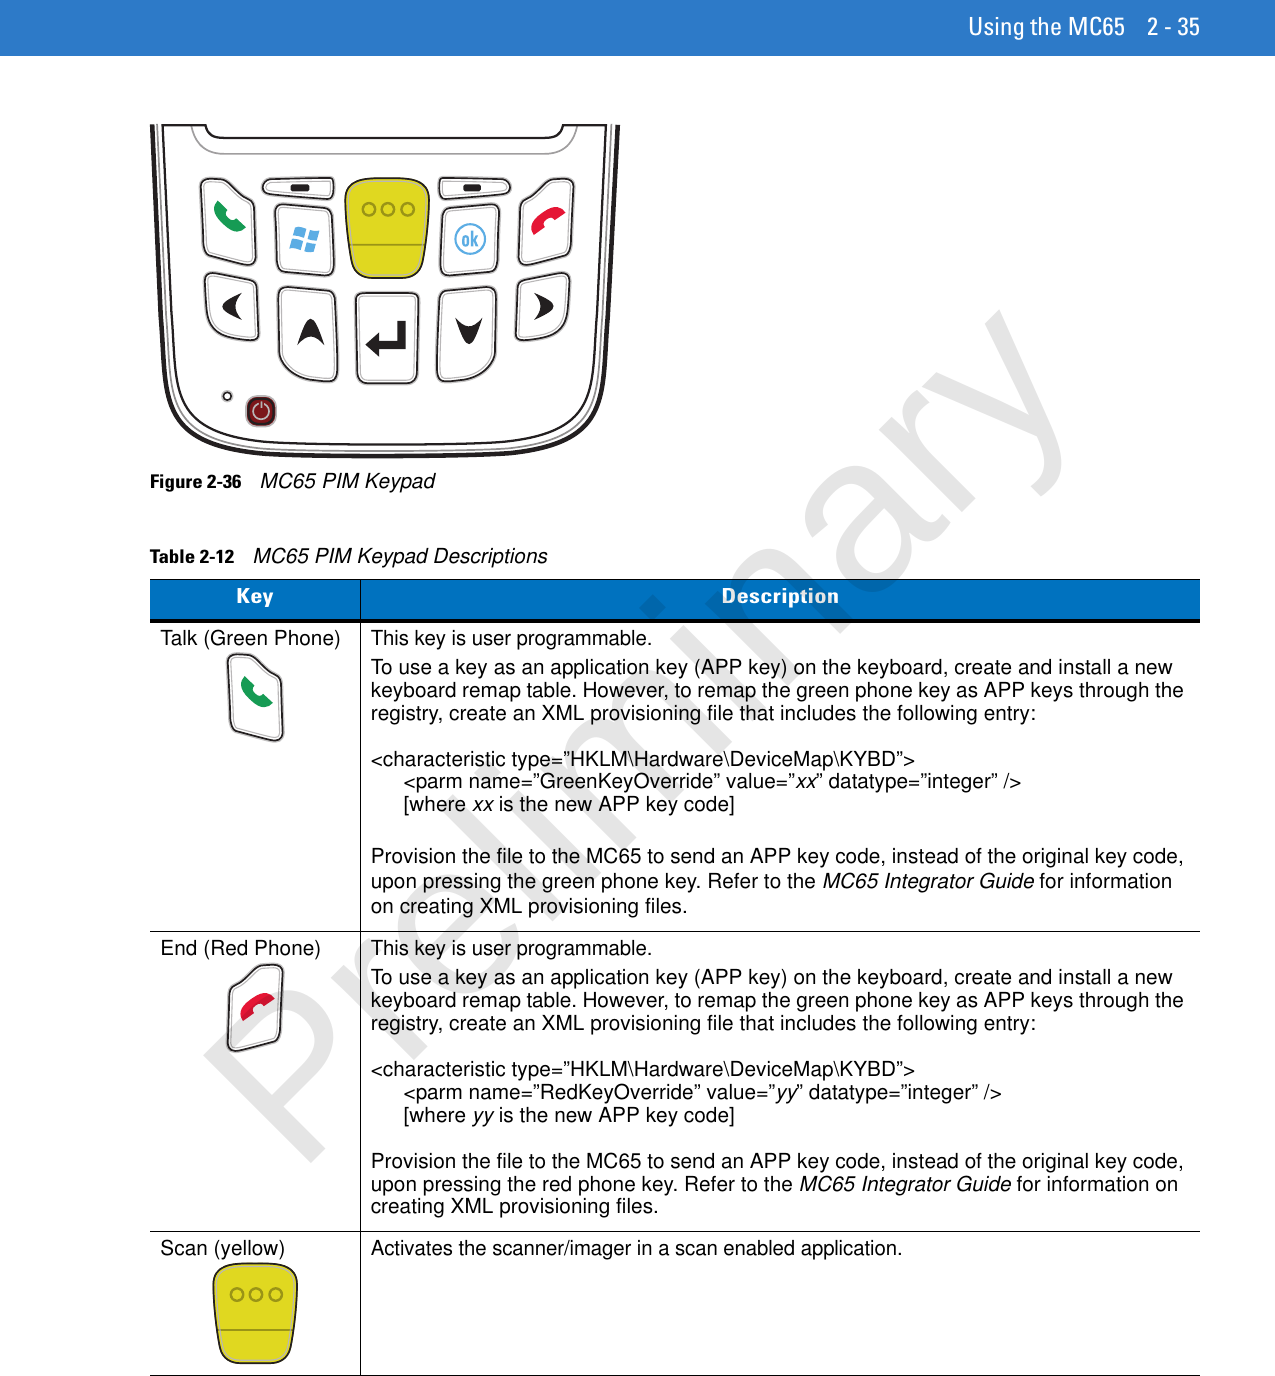 Using the MC65 2 - 35Figure 2-36    MC65 PIM KeypadTable 2-12    MC65 PIM Keypad DescriptionsKey DescriptionTalk (Green Phone)This key is user programmable.To use a key as an application key (APP key) on the keyboard, create and install a new keyboard remap table. However, to remap the green phone key as APP keys through the registry, create an XML provisioning file that includes the following entry:&lt;characteristic type=”HKLM\Hardware\DeviceMap\KYBD”&gt;&lt;parm name=”GreenKeyOverride” value=”xx” datatype=”integer” /&gt; [where xx is the new APP key code]Provision the file to the MC65 to send an APP key code, instead of the original key code, upon pressing the green phone key. Refer to the MC65 Integrator Guide for information on creating XML provisioning files.End (Red Phone)This key is user programmable.To use a key as an application key (APP key) on the keyboard, create and install a new keyboard remap table. However, to remap the green phone key as APP keys through the registry, create an XML provisioning file that includes the following entry:&lt;characteristic type=”HKLM\Hardware\DeviceMap\KYBD”&gt;&lt;parm name=”RedKeyOverride” value=”yy” datatype=”integer” /&gt; [where yy is the new APP key code]Provision the file to the MC65 to send an APP key code, instead of the original key code, upon pressing the red phone key. Refer to the MC65 Integrator Guide for information on creating XML provisioning files.Scan (yellow)Activates the scanner/imager in a scan enabled application. Preliminary